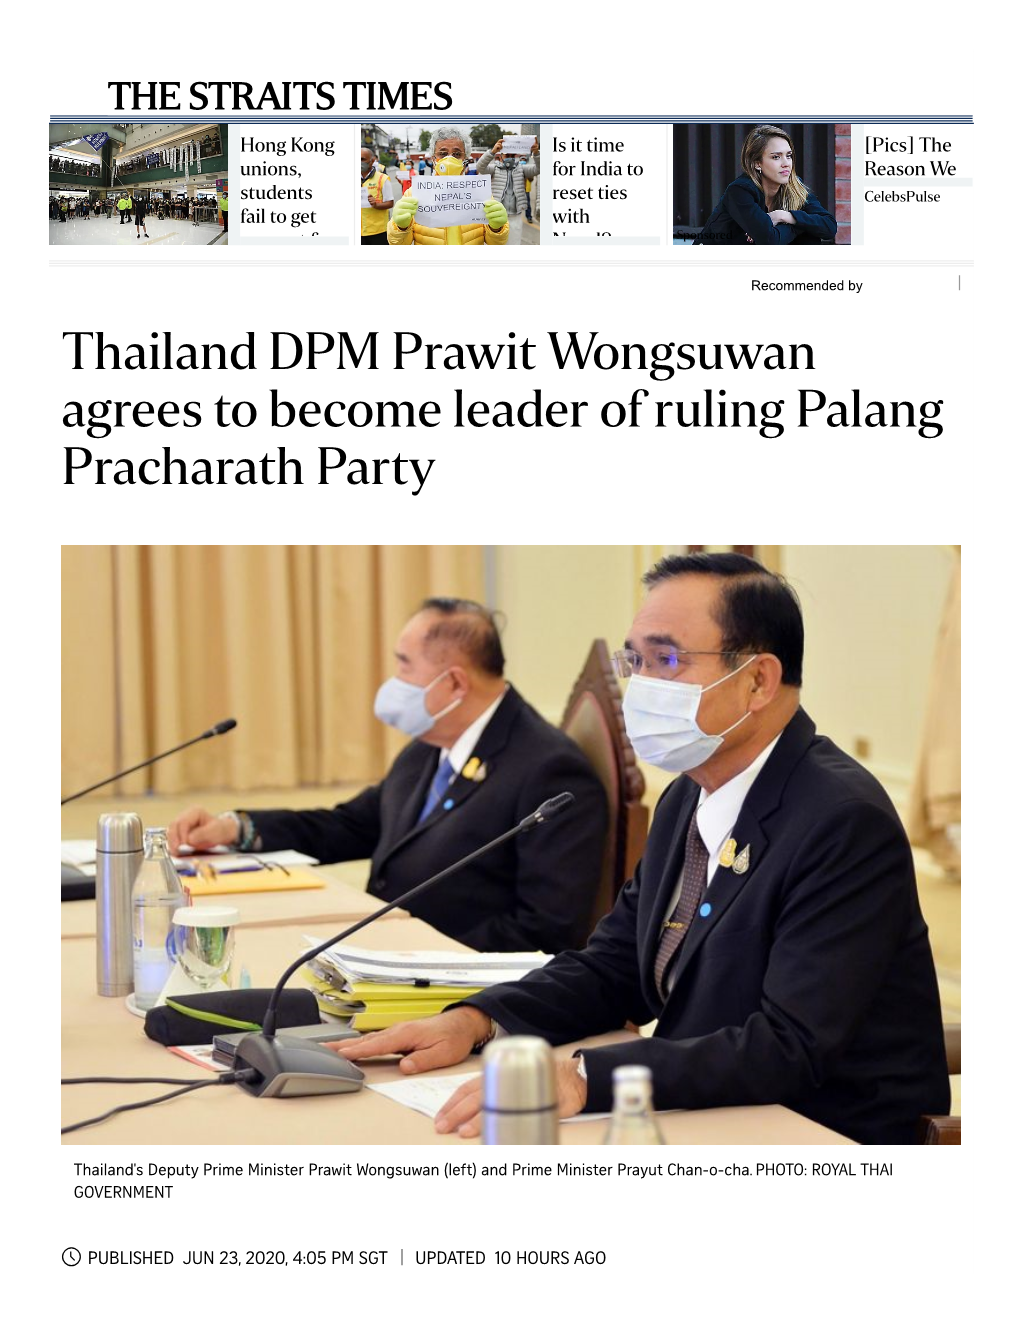 Thailand DPM Prawit Wongsuwan Agrees to Become Leader of Ruling Palang Pracharath Party